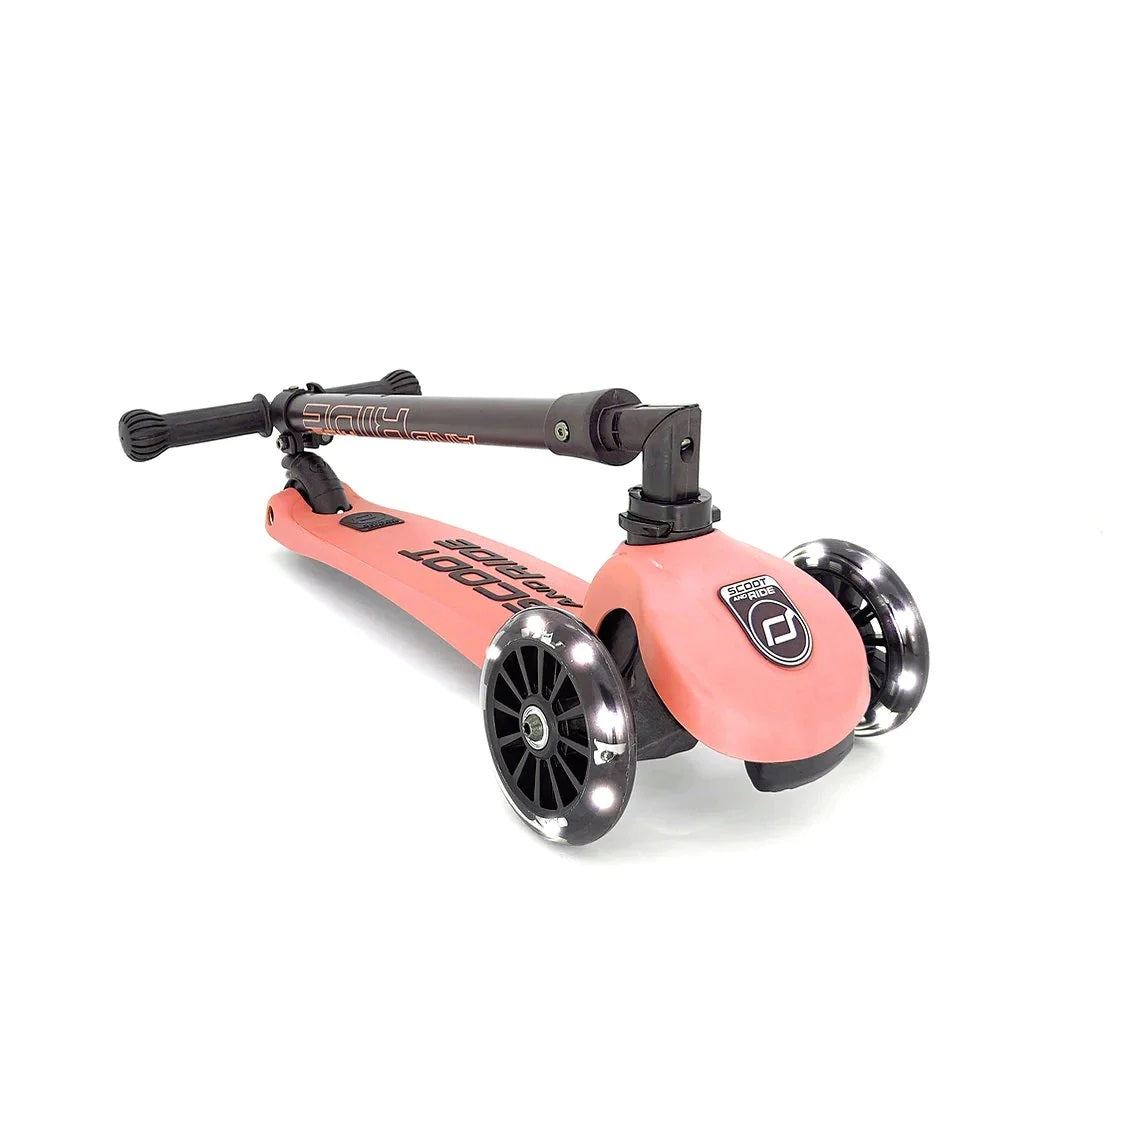 Scoot & Ride Highway Kick 3 LED Scooter - Peach